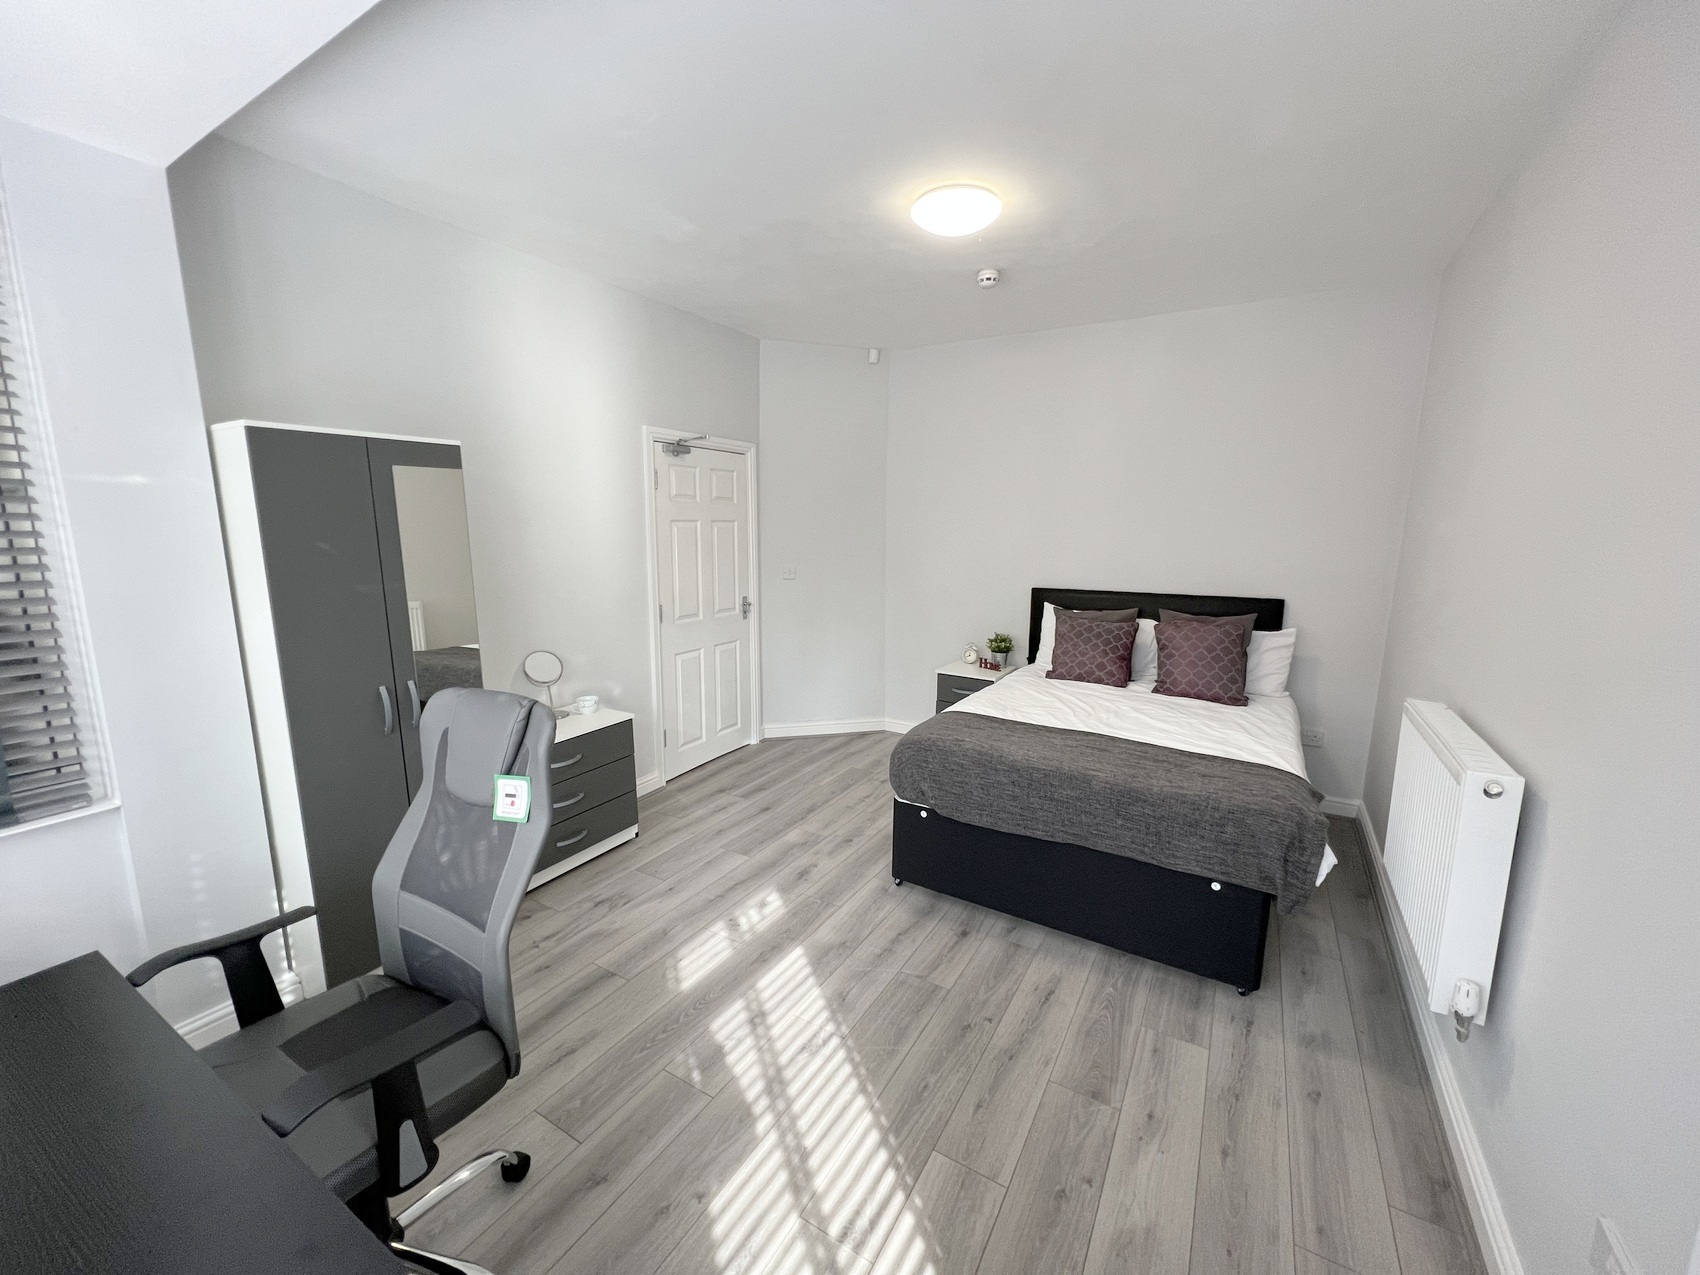 Luxurious Brand NEW Rooms Near Moseley Village! – Room 1